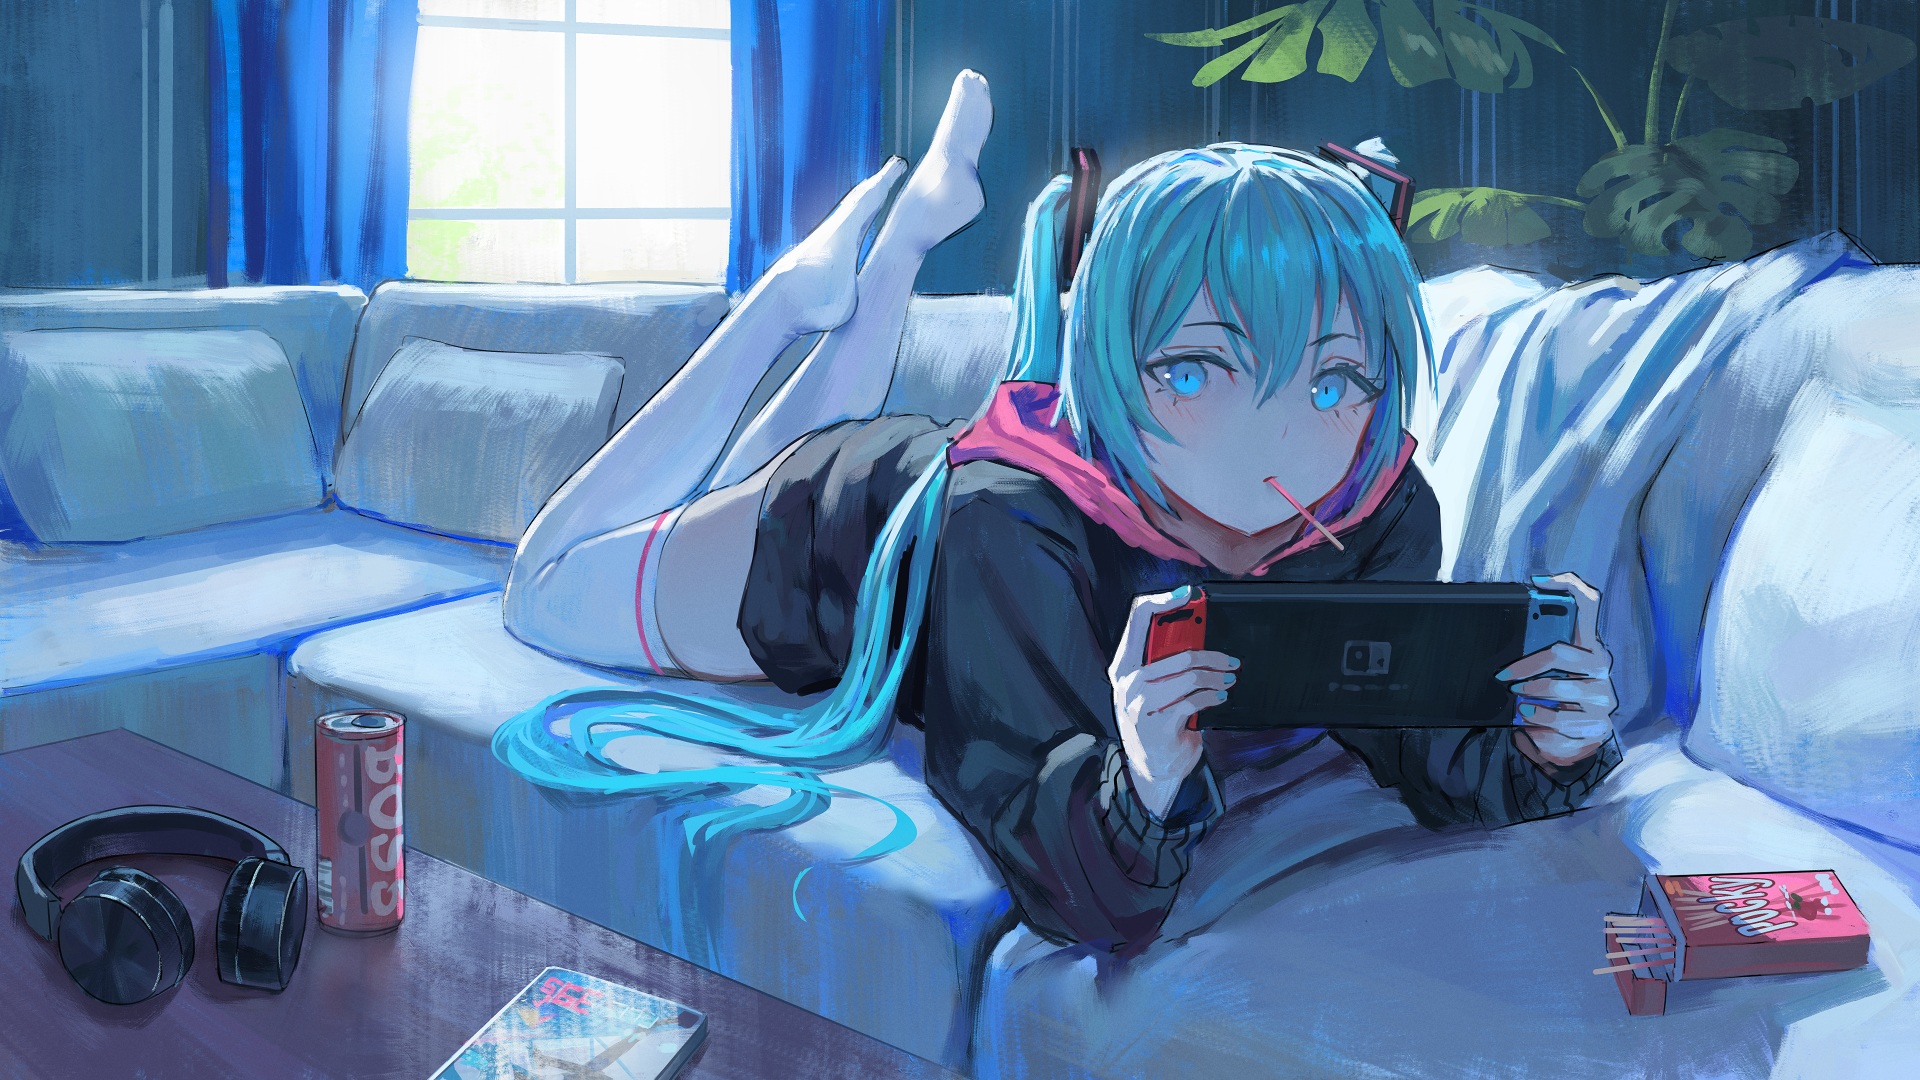 Anime 1920x1080 anime anime girls lying on couch couch headphones feet in the air blue eyes Nintendo Switch Pocky Hatsune Miku Vocaloid